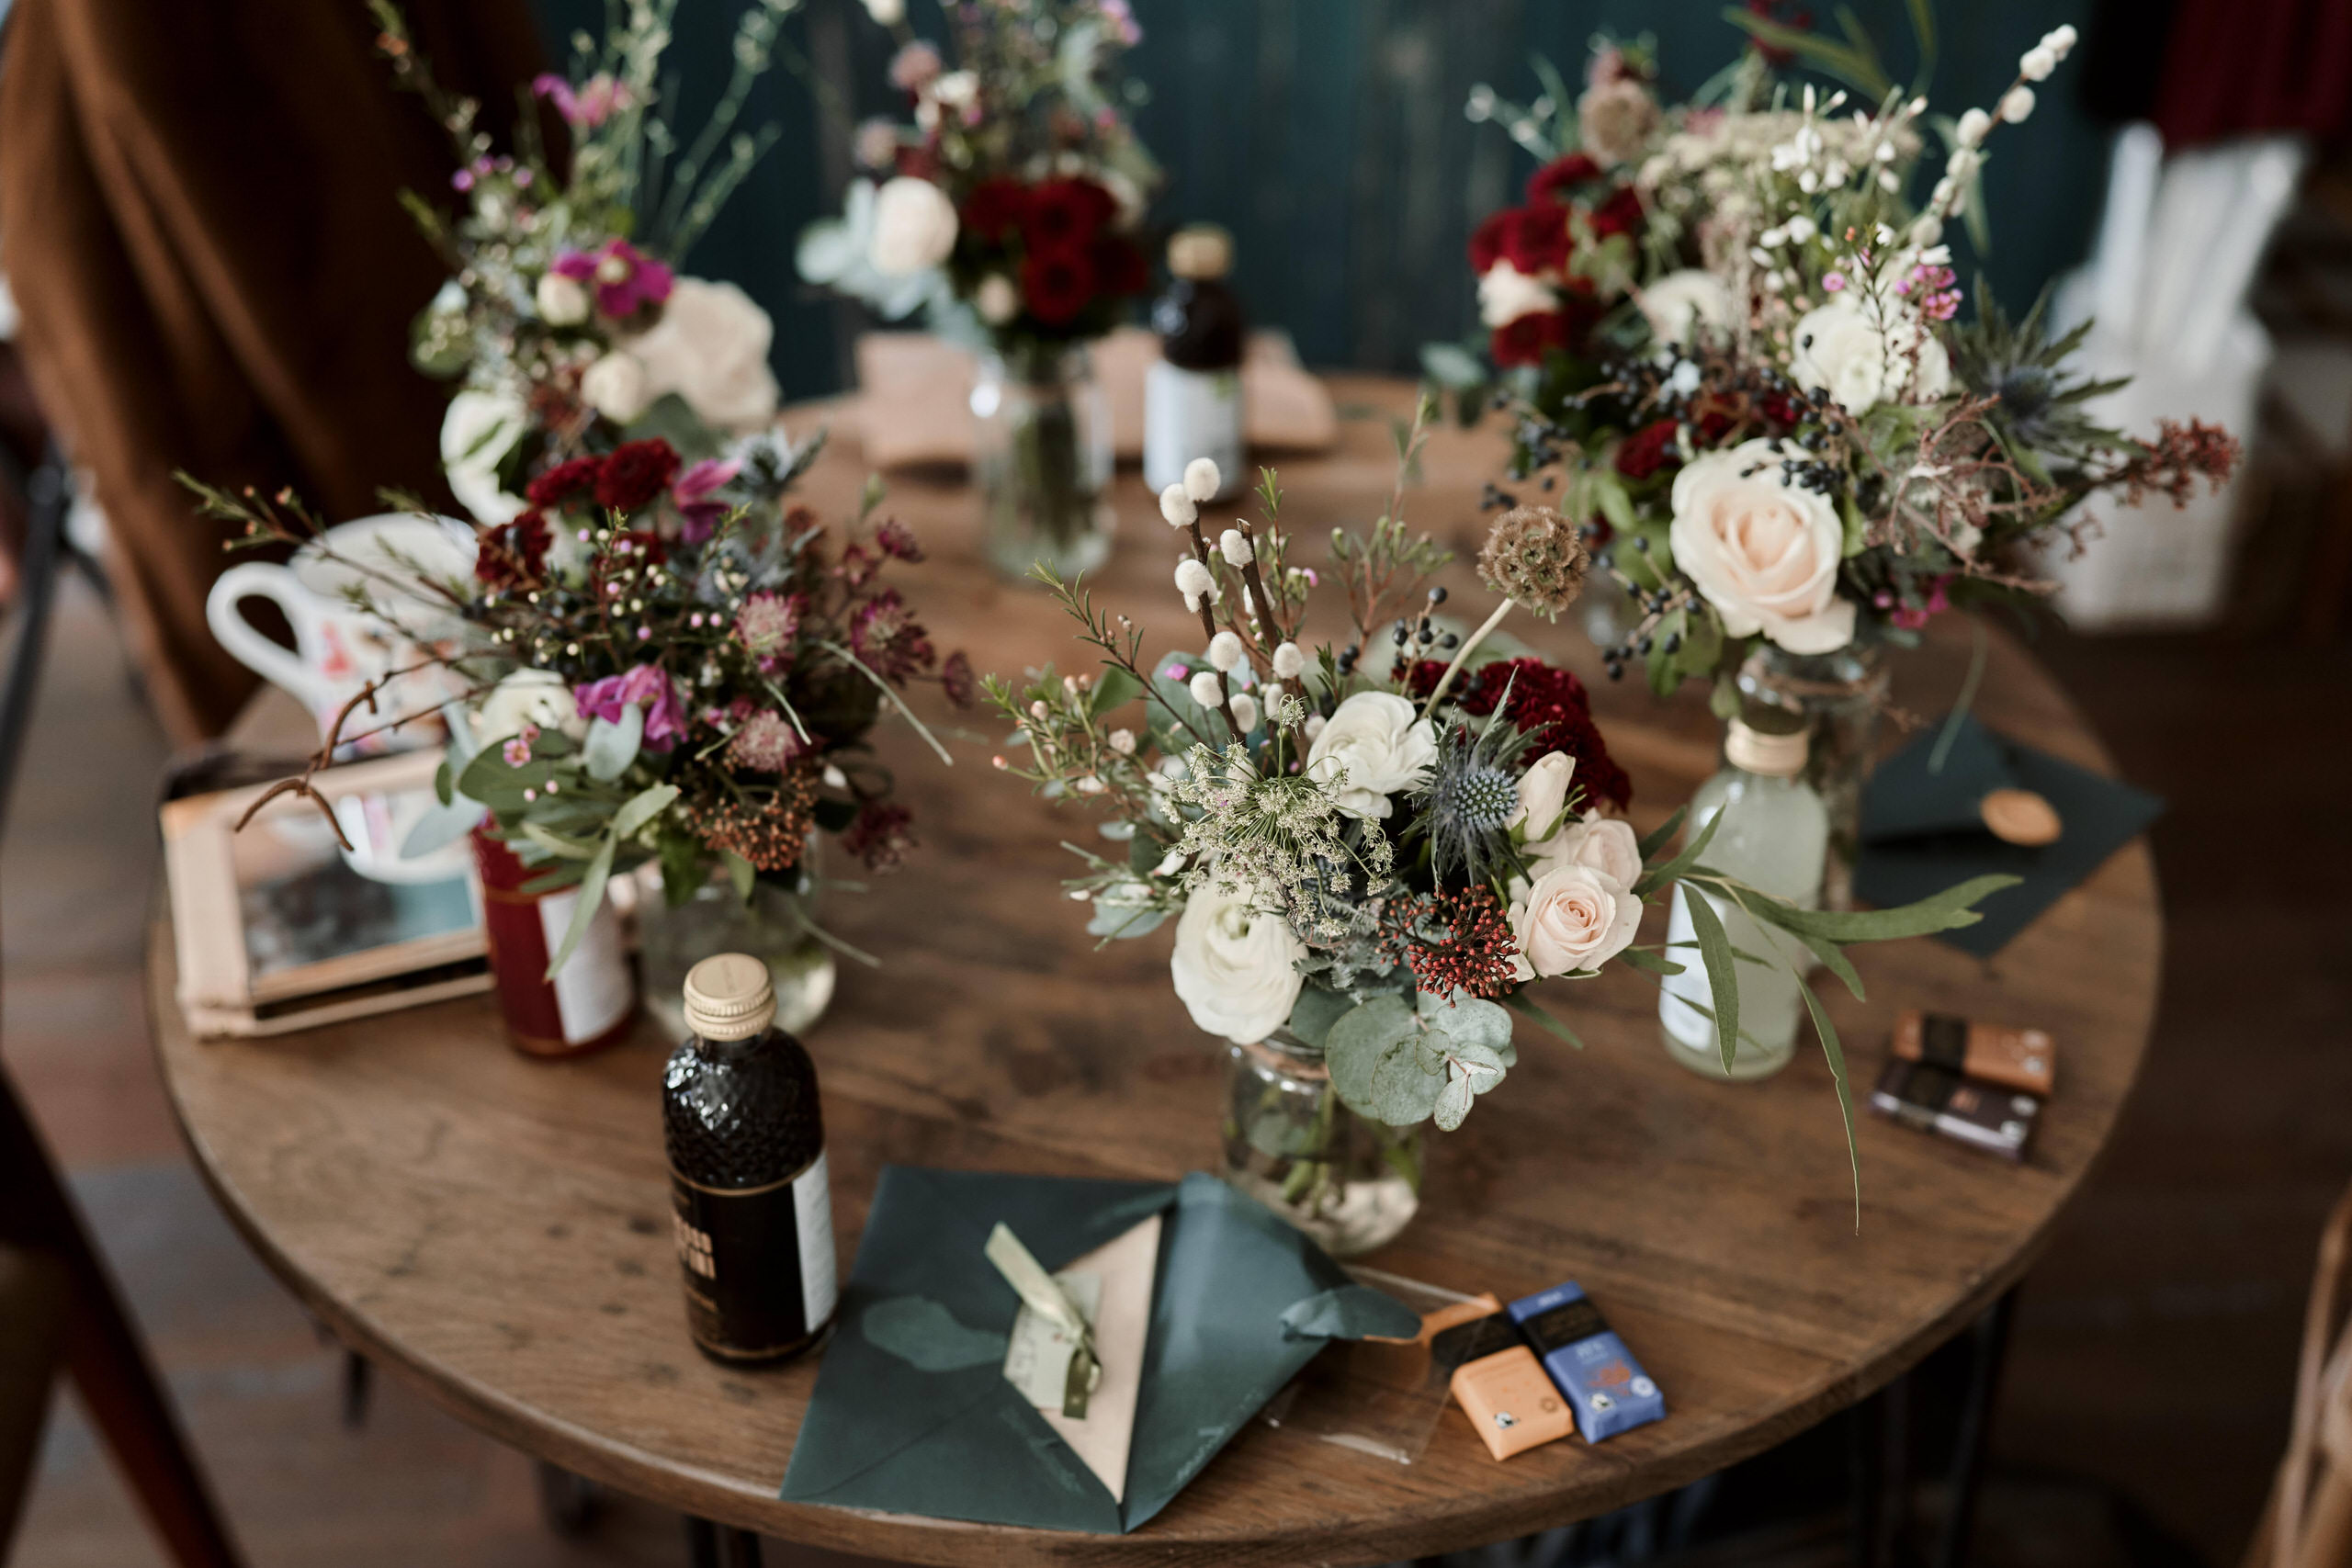 A table with flower vases on it.